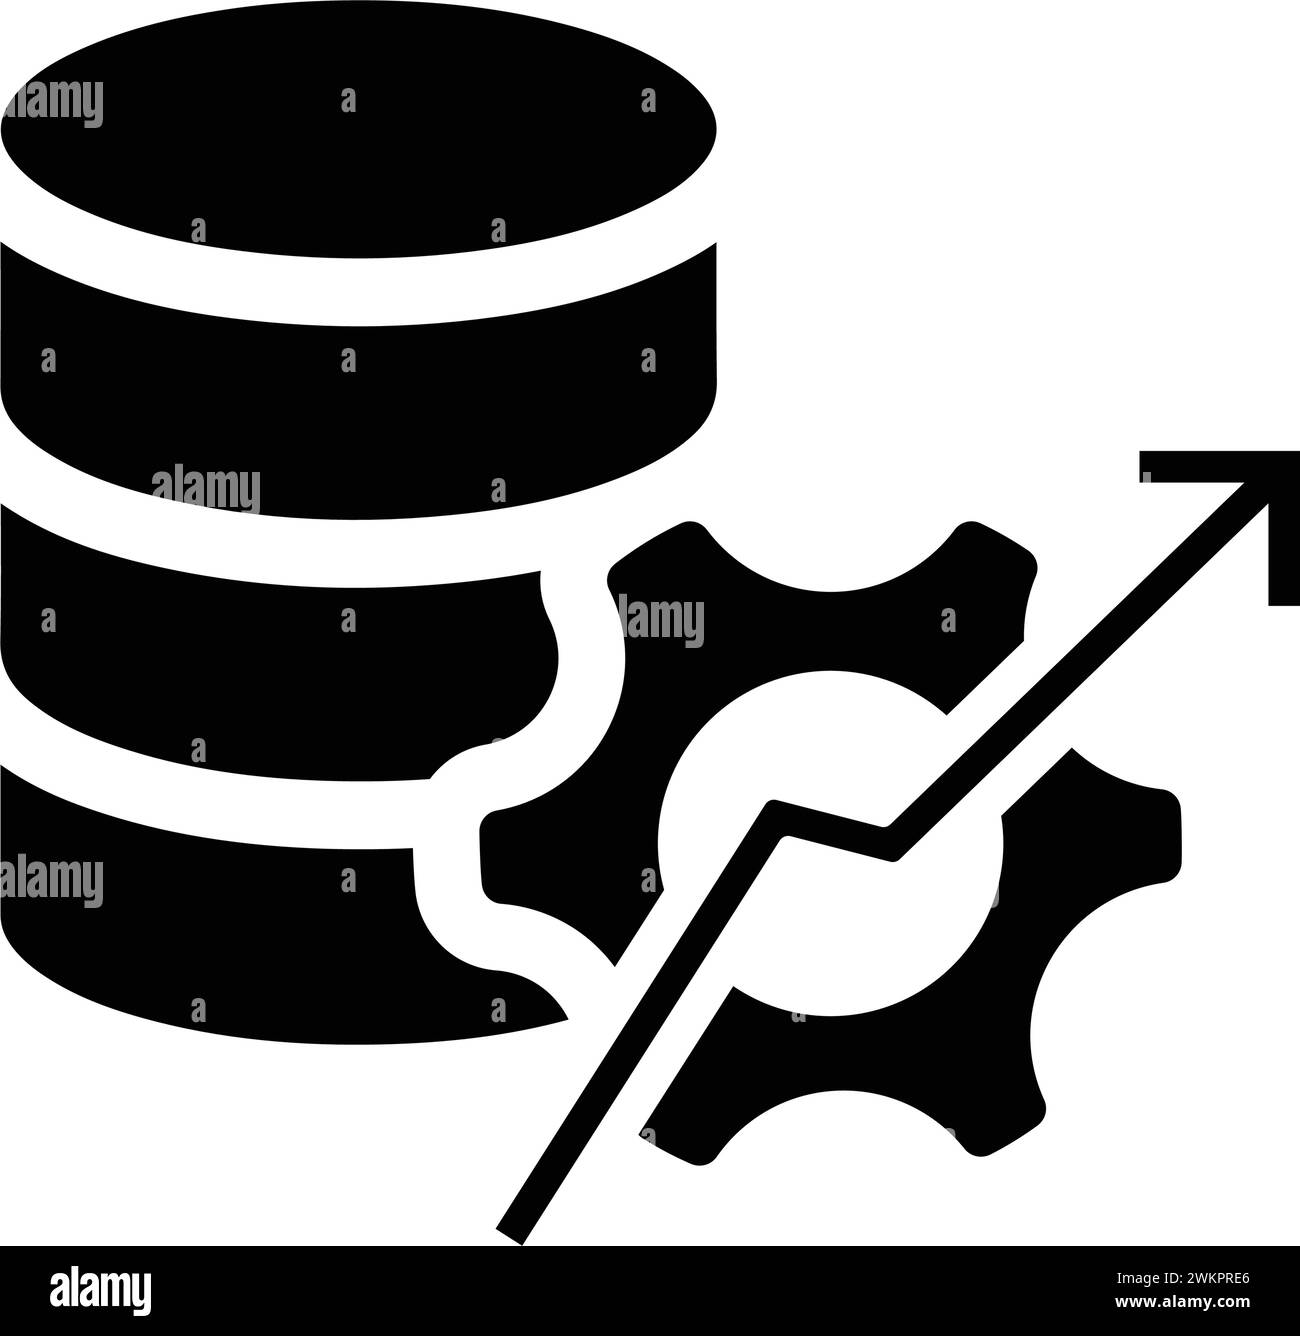 Data, optimization, indicator icon. Simple vector illustration for web, print files, graphic or commercial purposes. Stock Vector